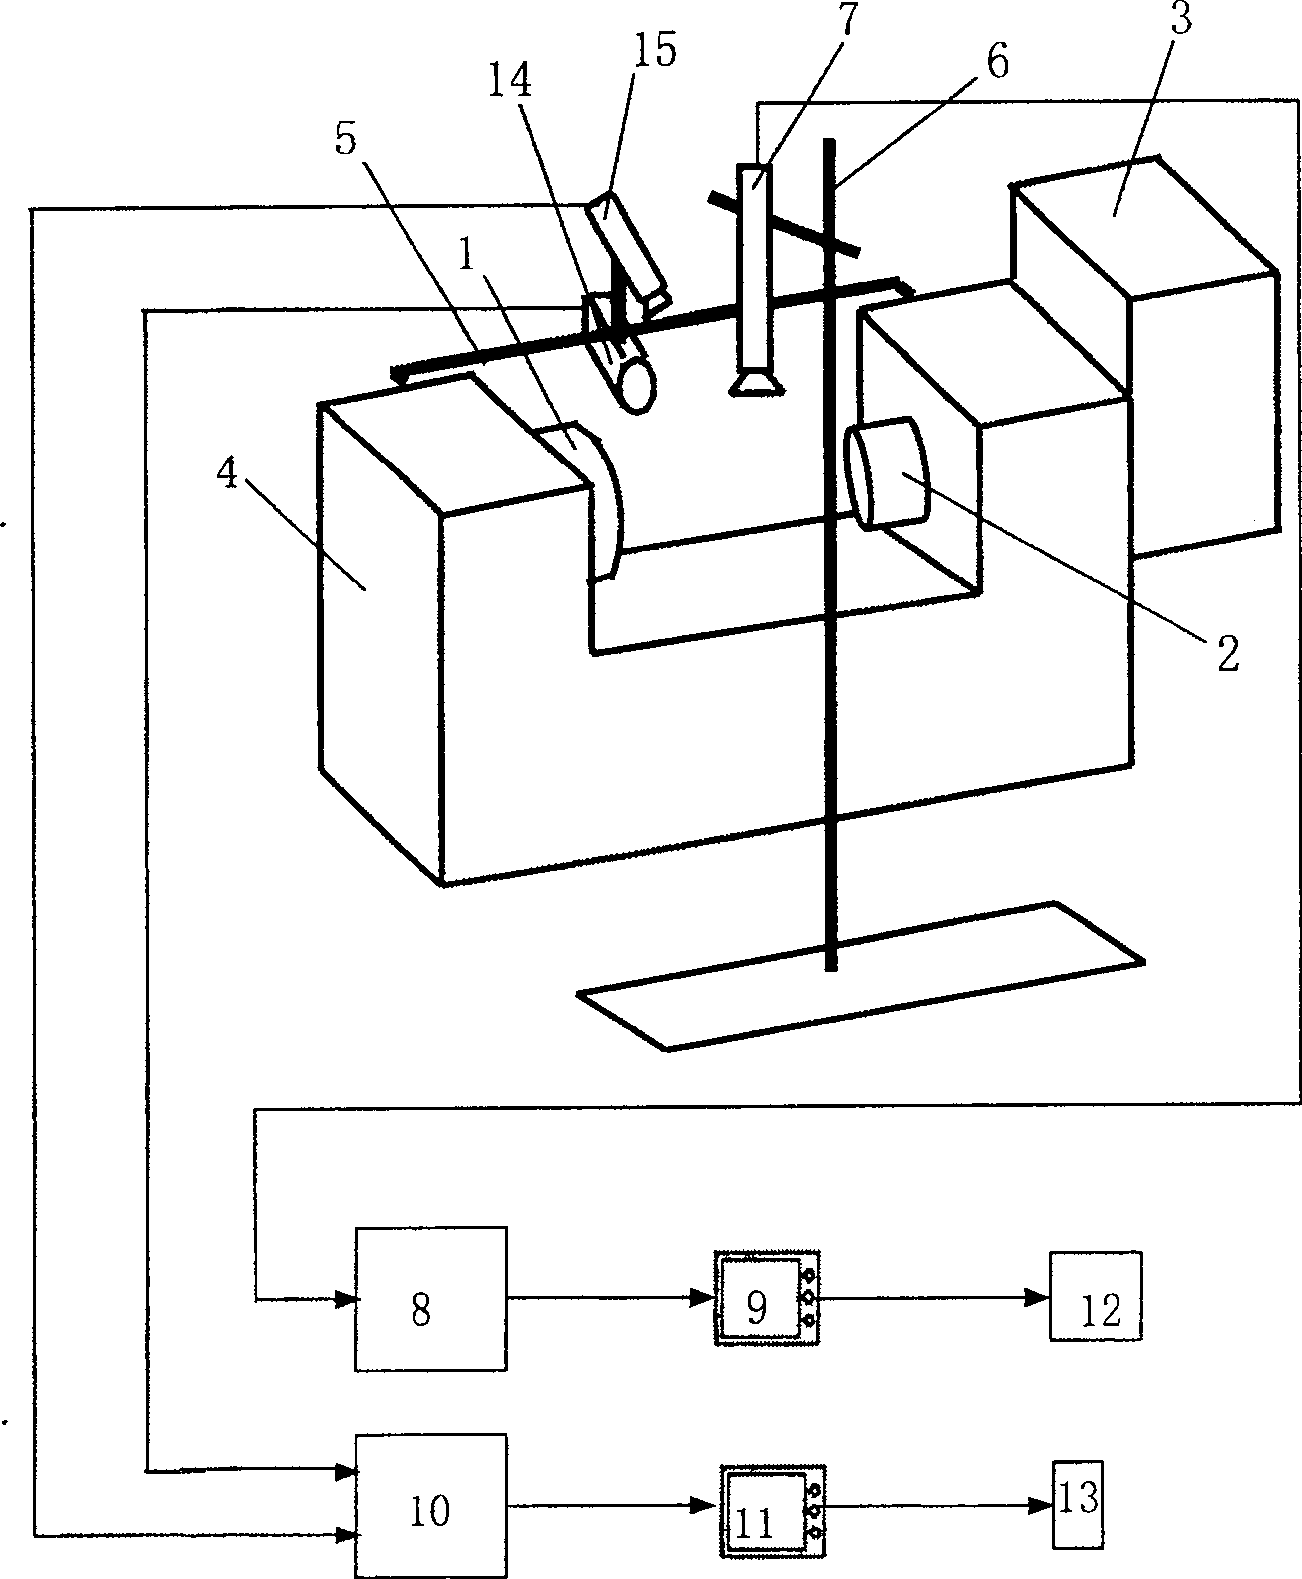 Stress-water flow-ohemical coupled rock urpture process mesomechanic loading system